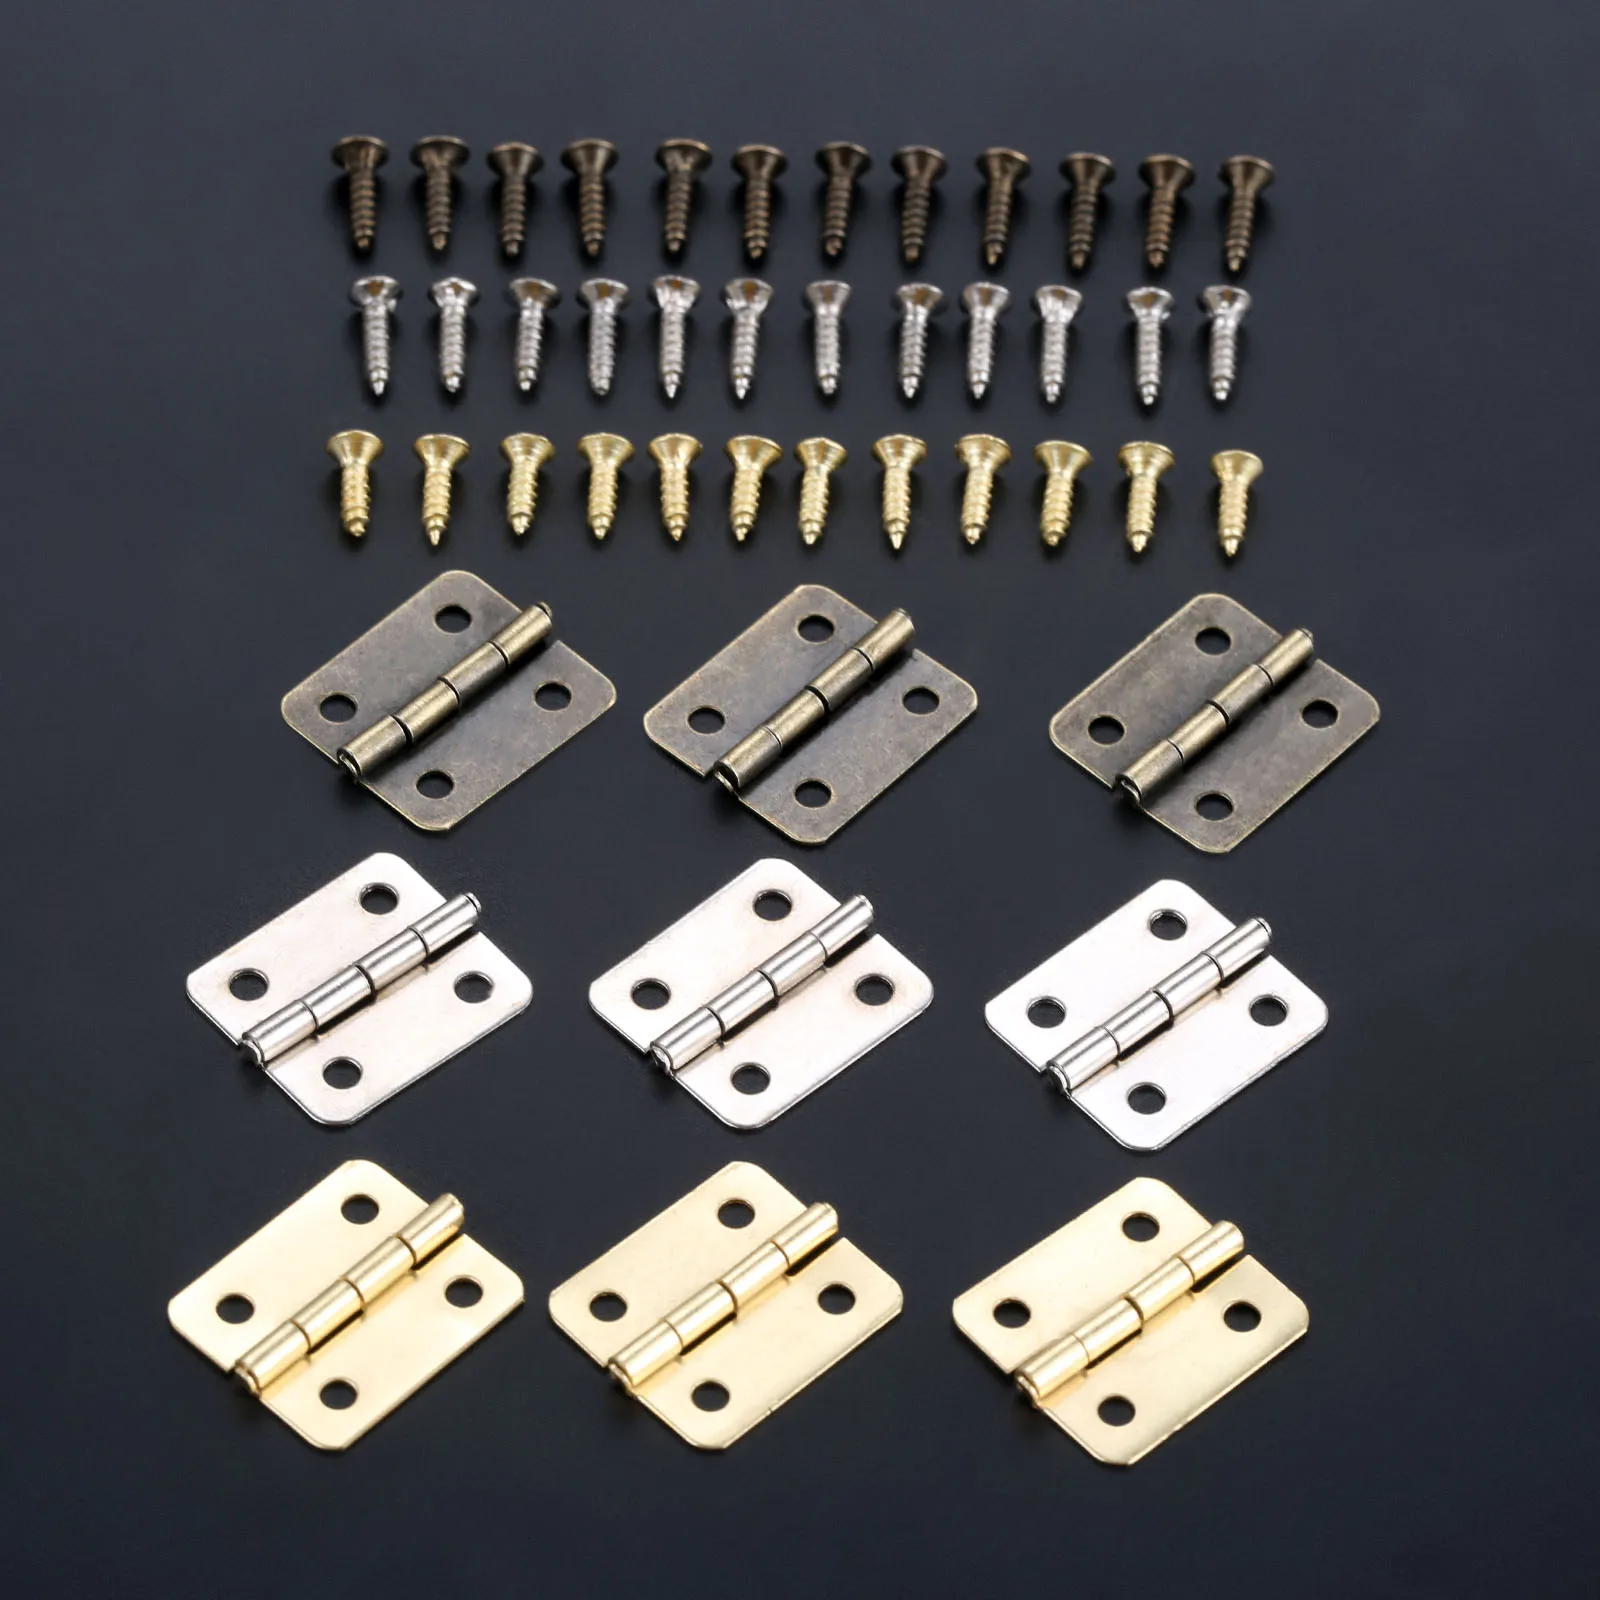 10sets Hinges w/screw Fillet Silver/Antique bronze/Gold 4 Holes 18*16mm Decor Cabinet Wooden Box Jewelry Wine Gift Case Vintage